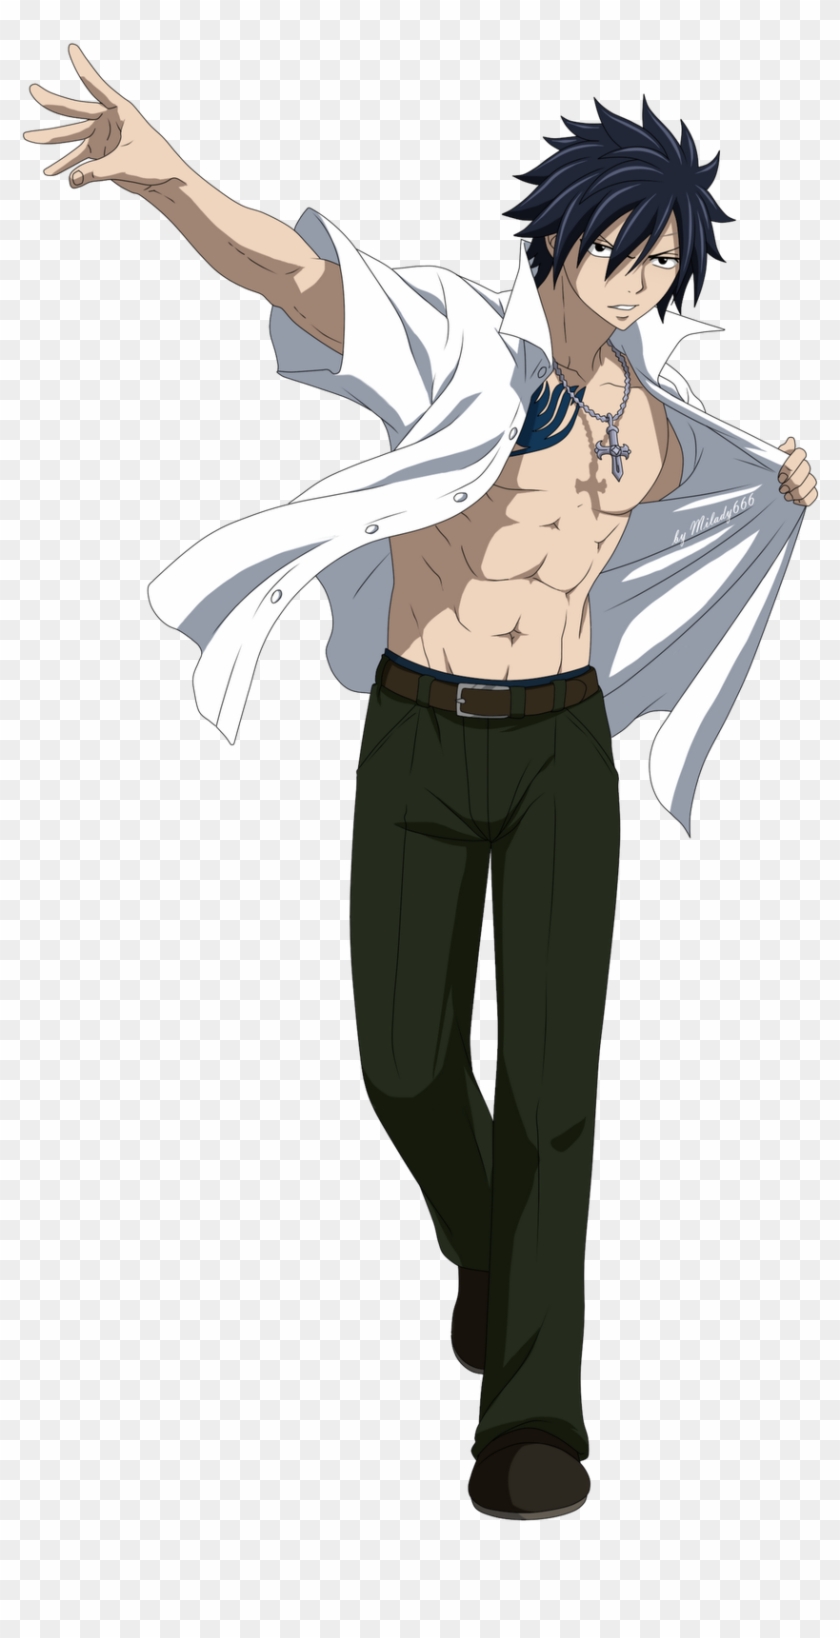 We Have Nothing To Fear Even If We Don't Have Any Magic - Fairy Tail Gray Shirtless Clipart